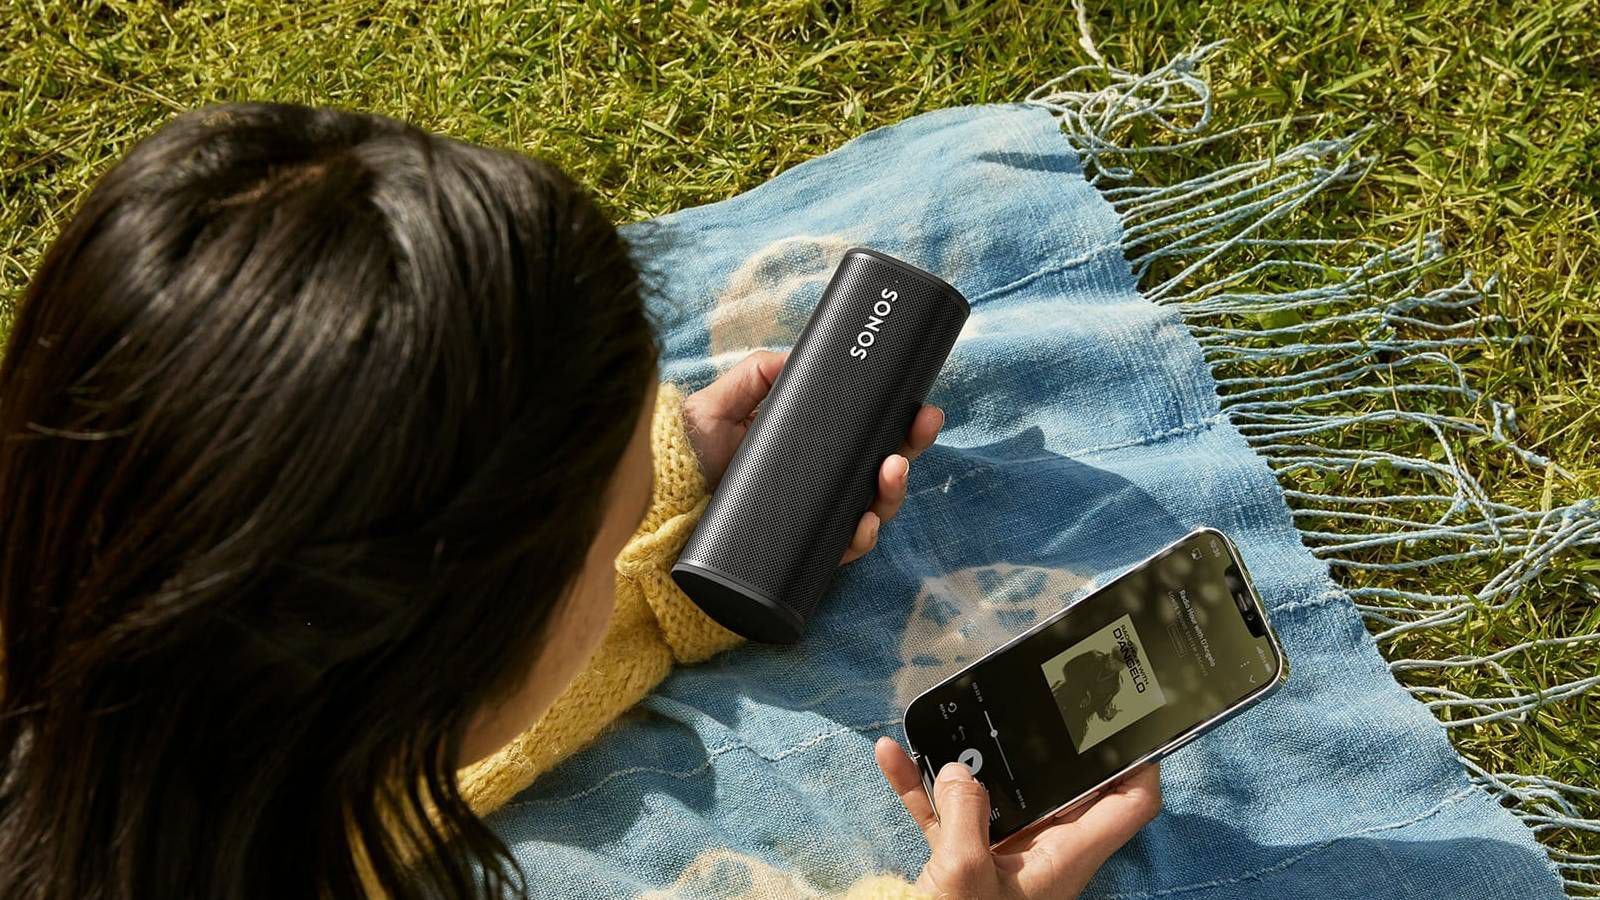 Sonos unveils the Roam portable speaker with AirPlay 2